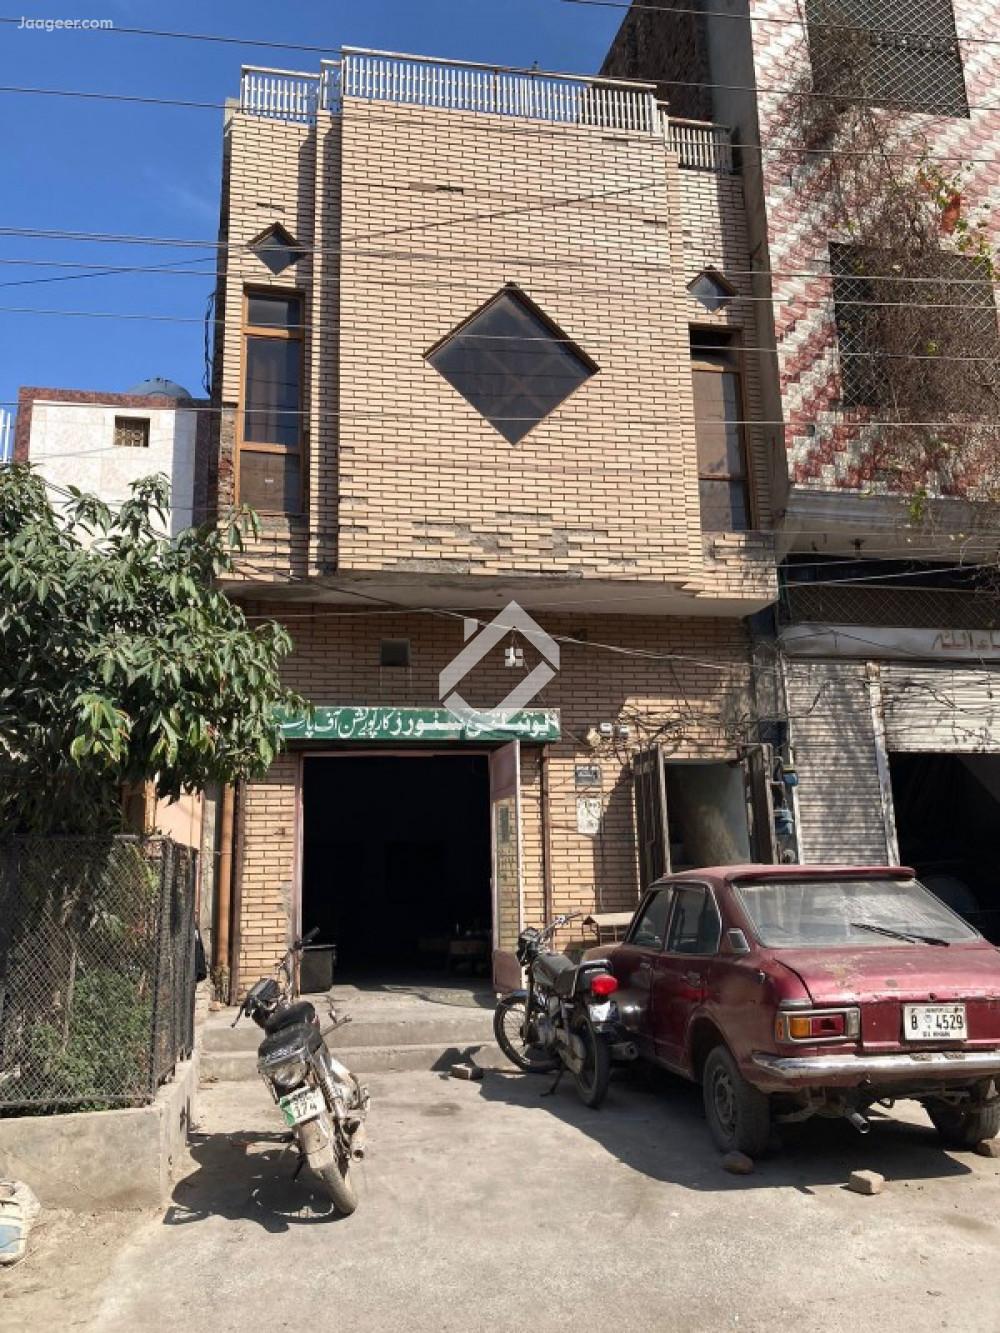 View  3 Marla Commercial House For Sale In Maqam-E-Hayat Dall Mill in Maqam E Hayat, Sargodha